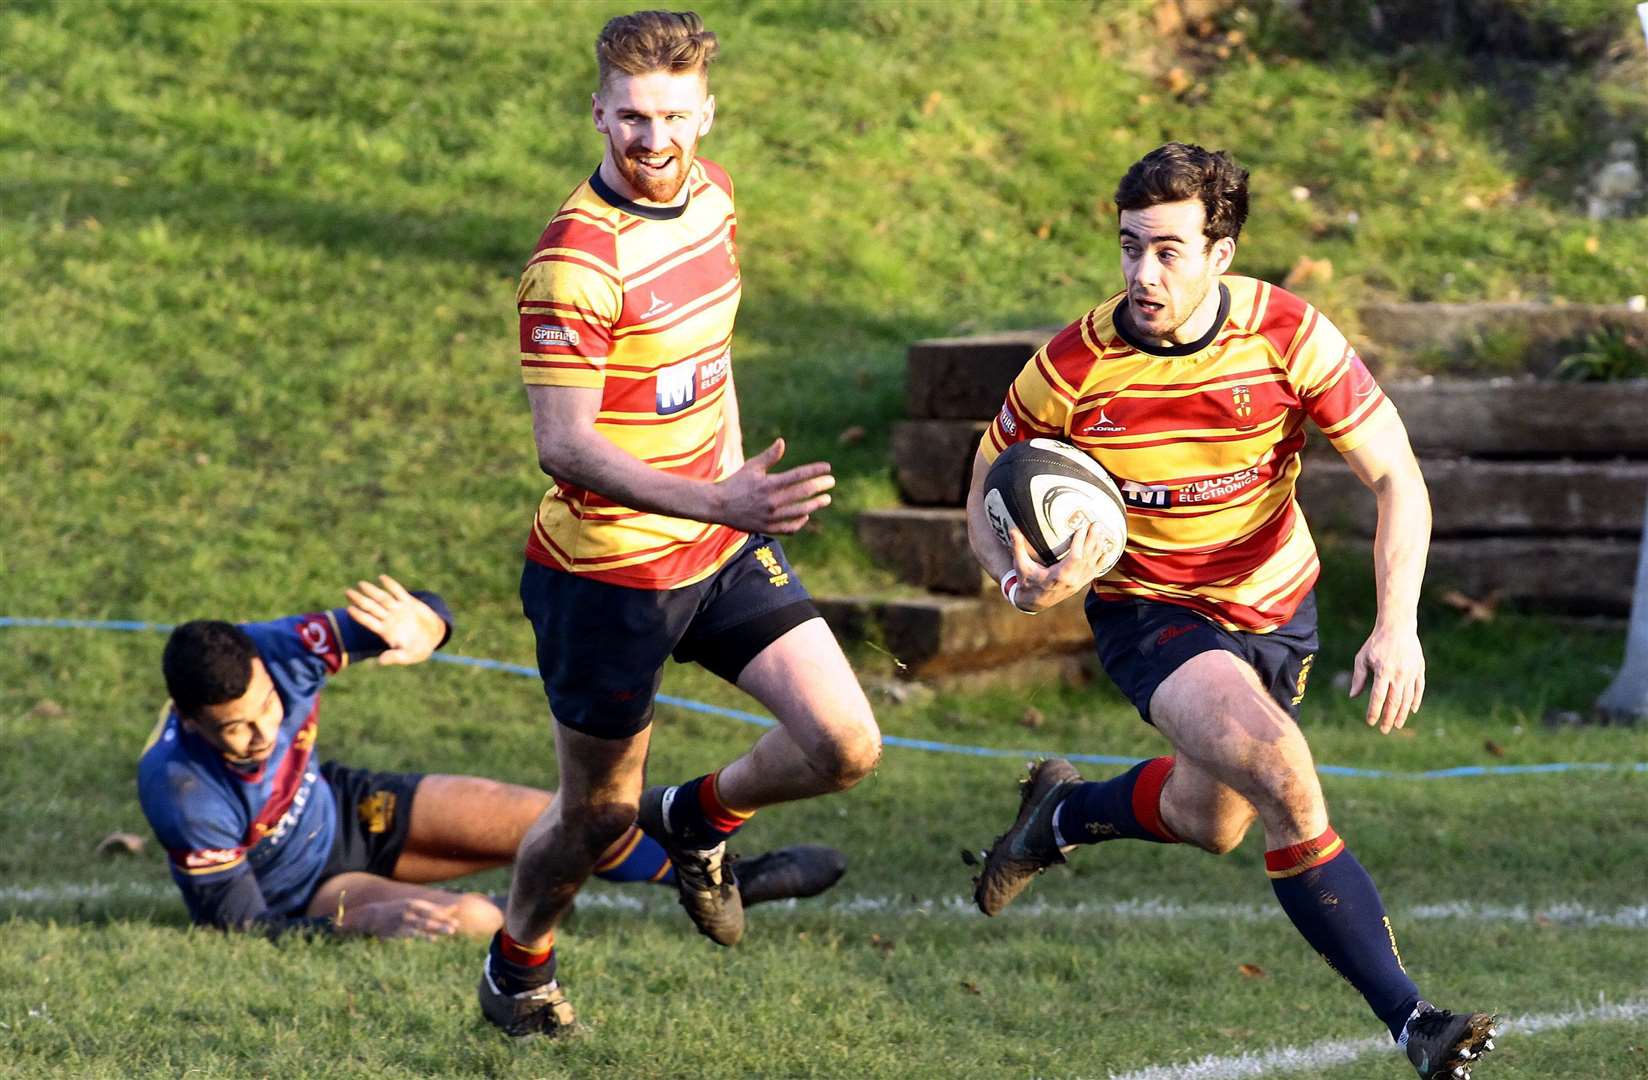 Medway Rugby Club will welcome the Royal Engineers to their home ground after agreeing a partnership Picture: Sean Aidan